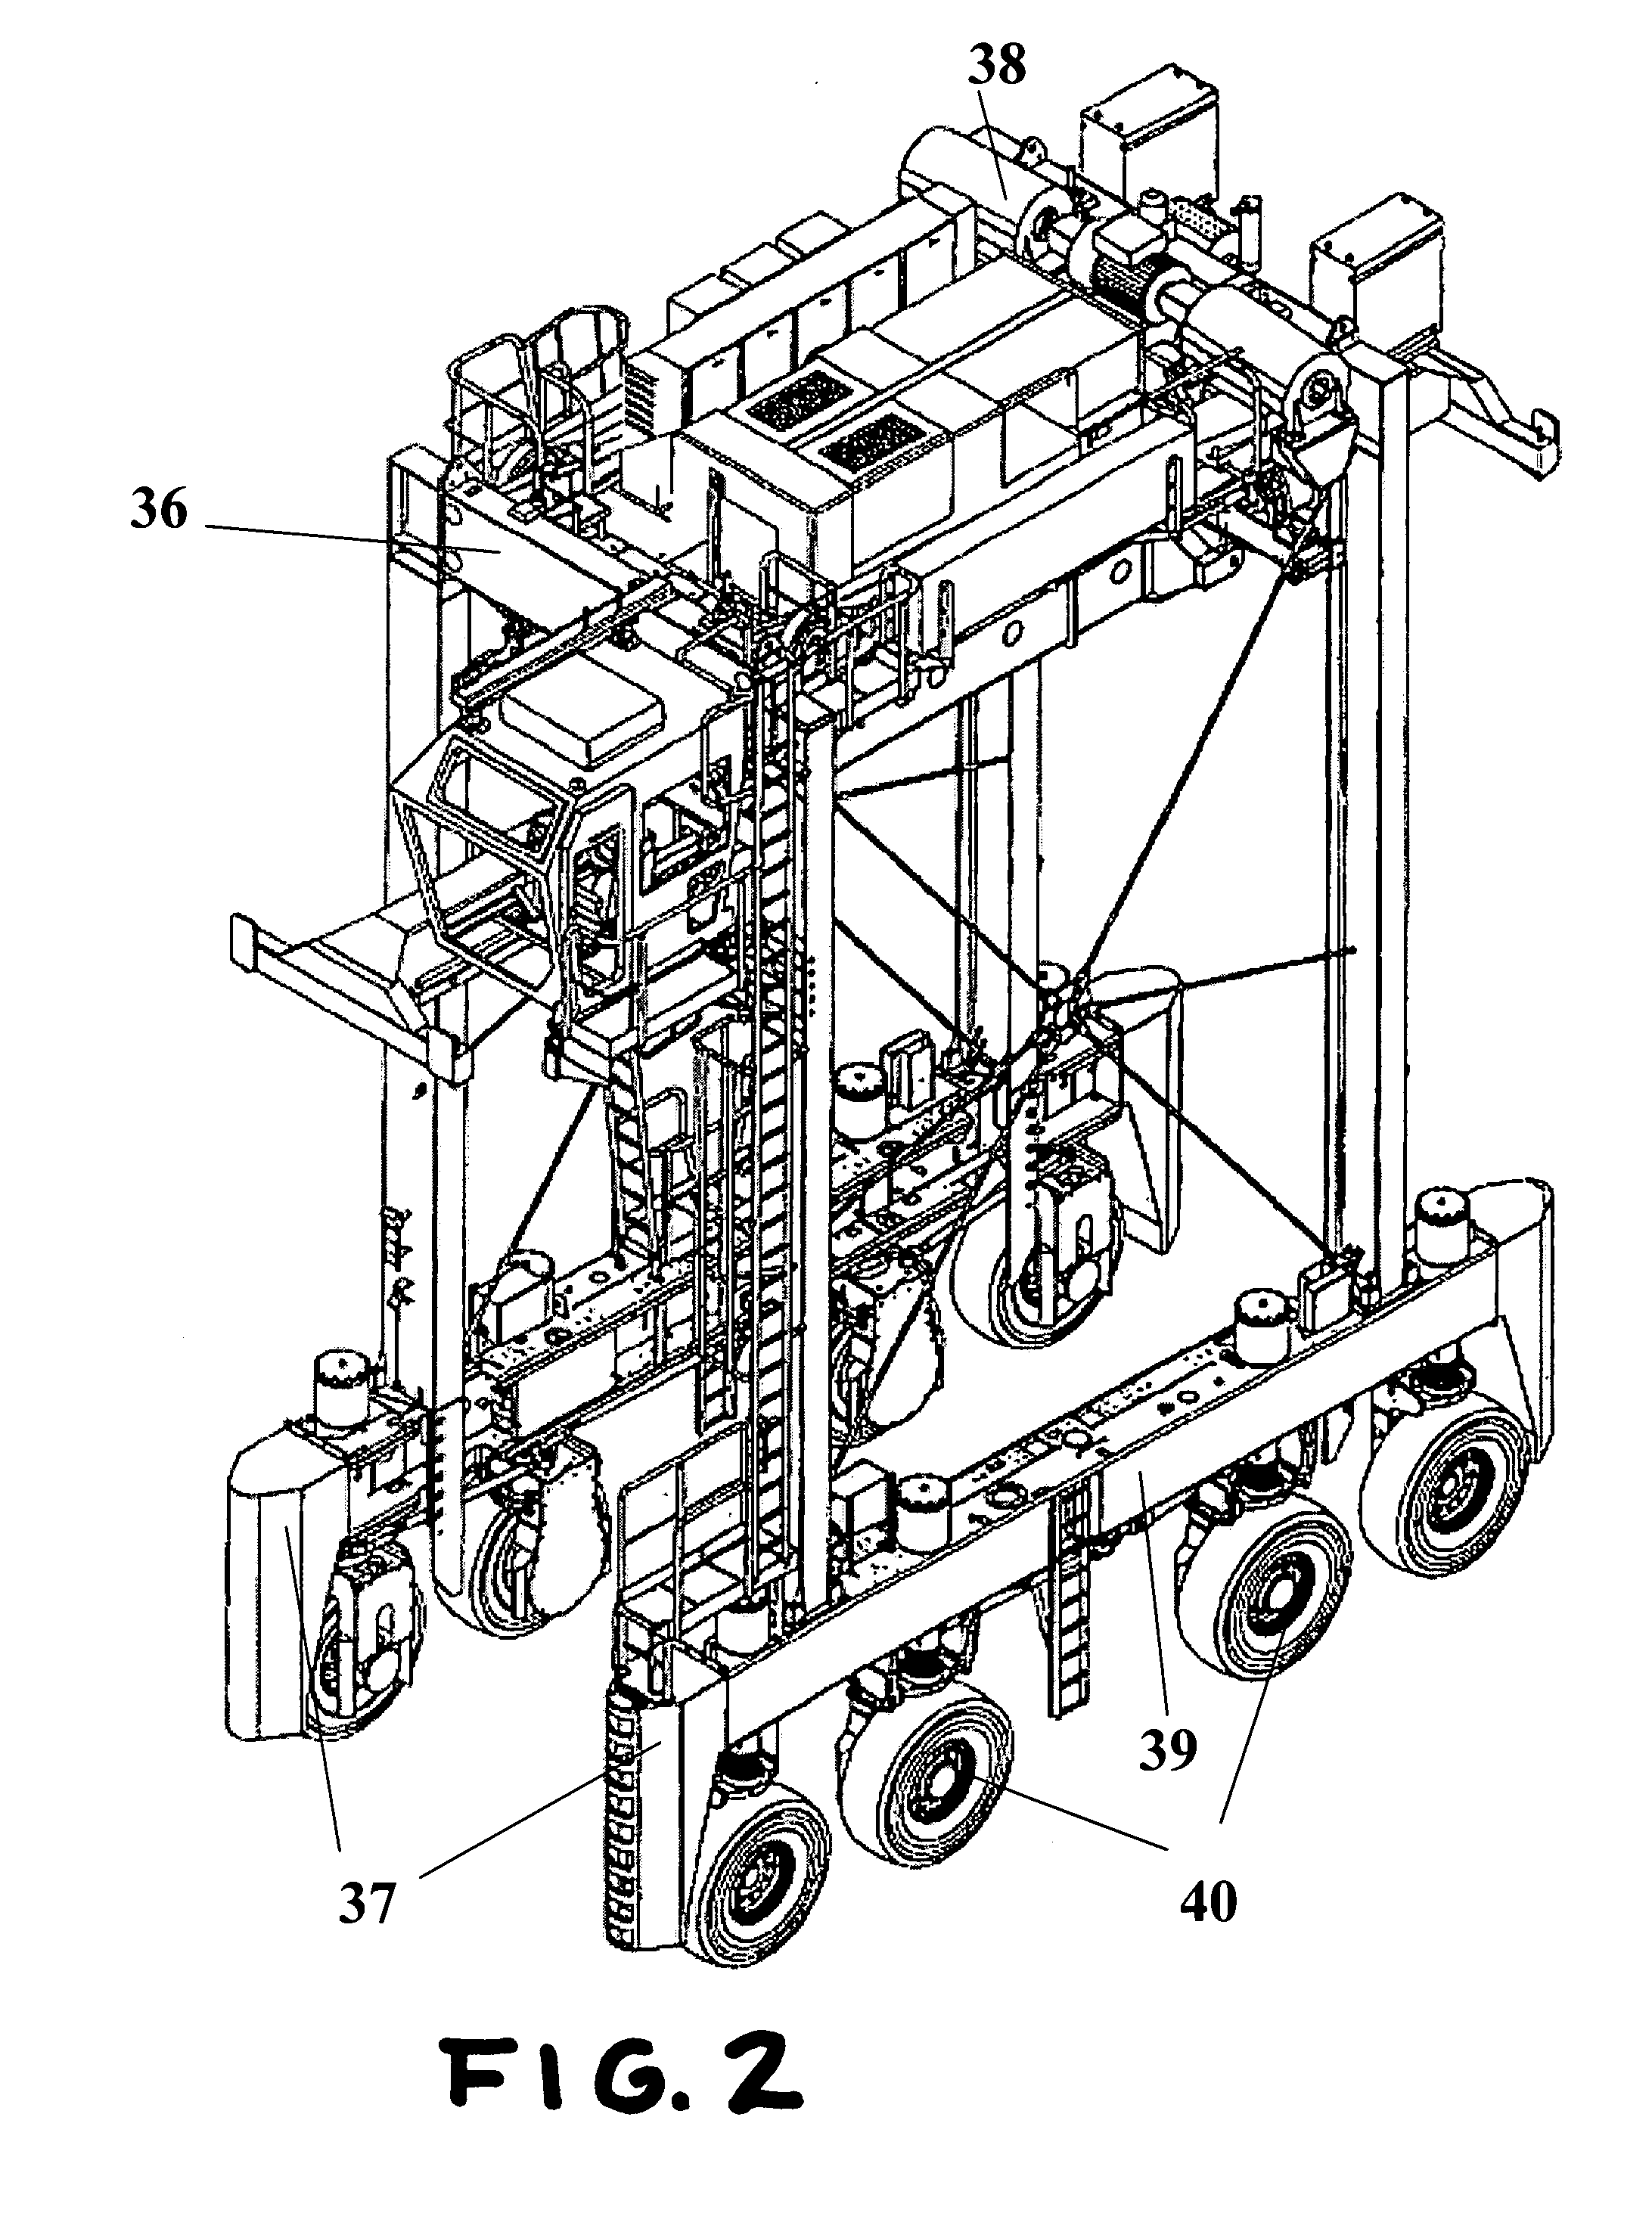 Straddle carrier having a low-emission and low-maintenance turbine drive